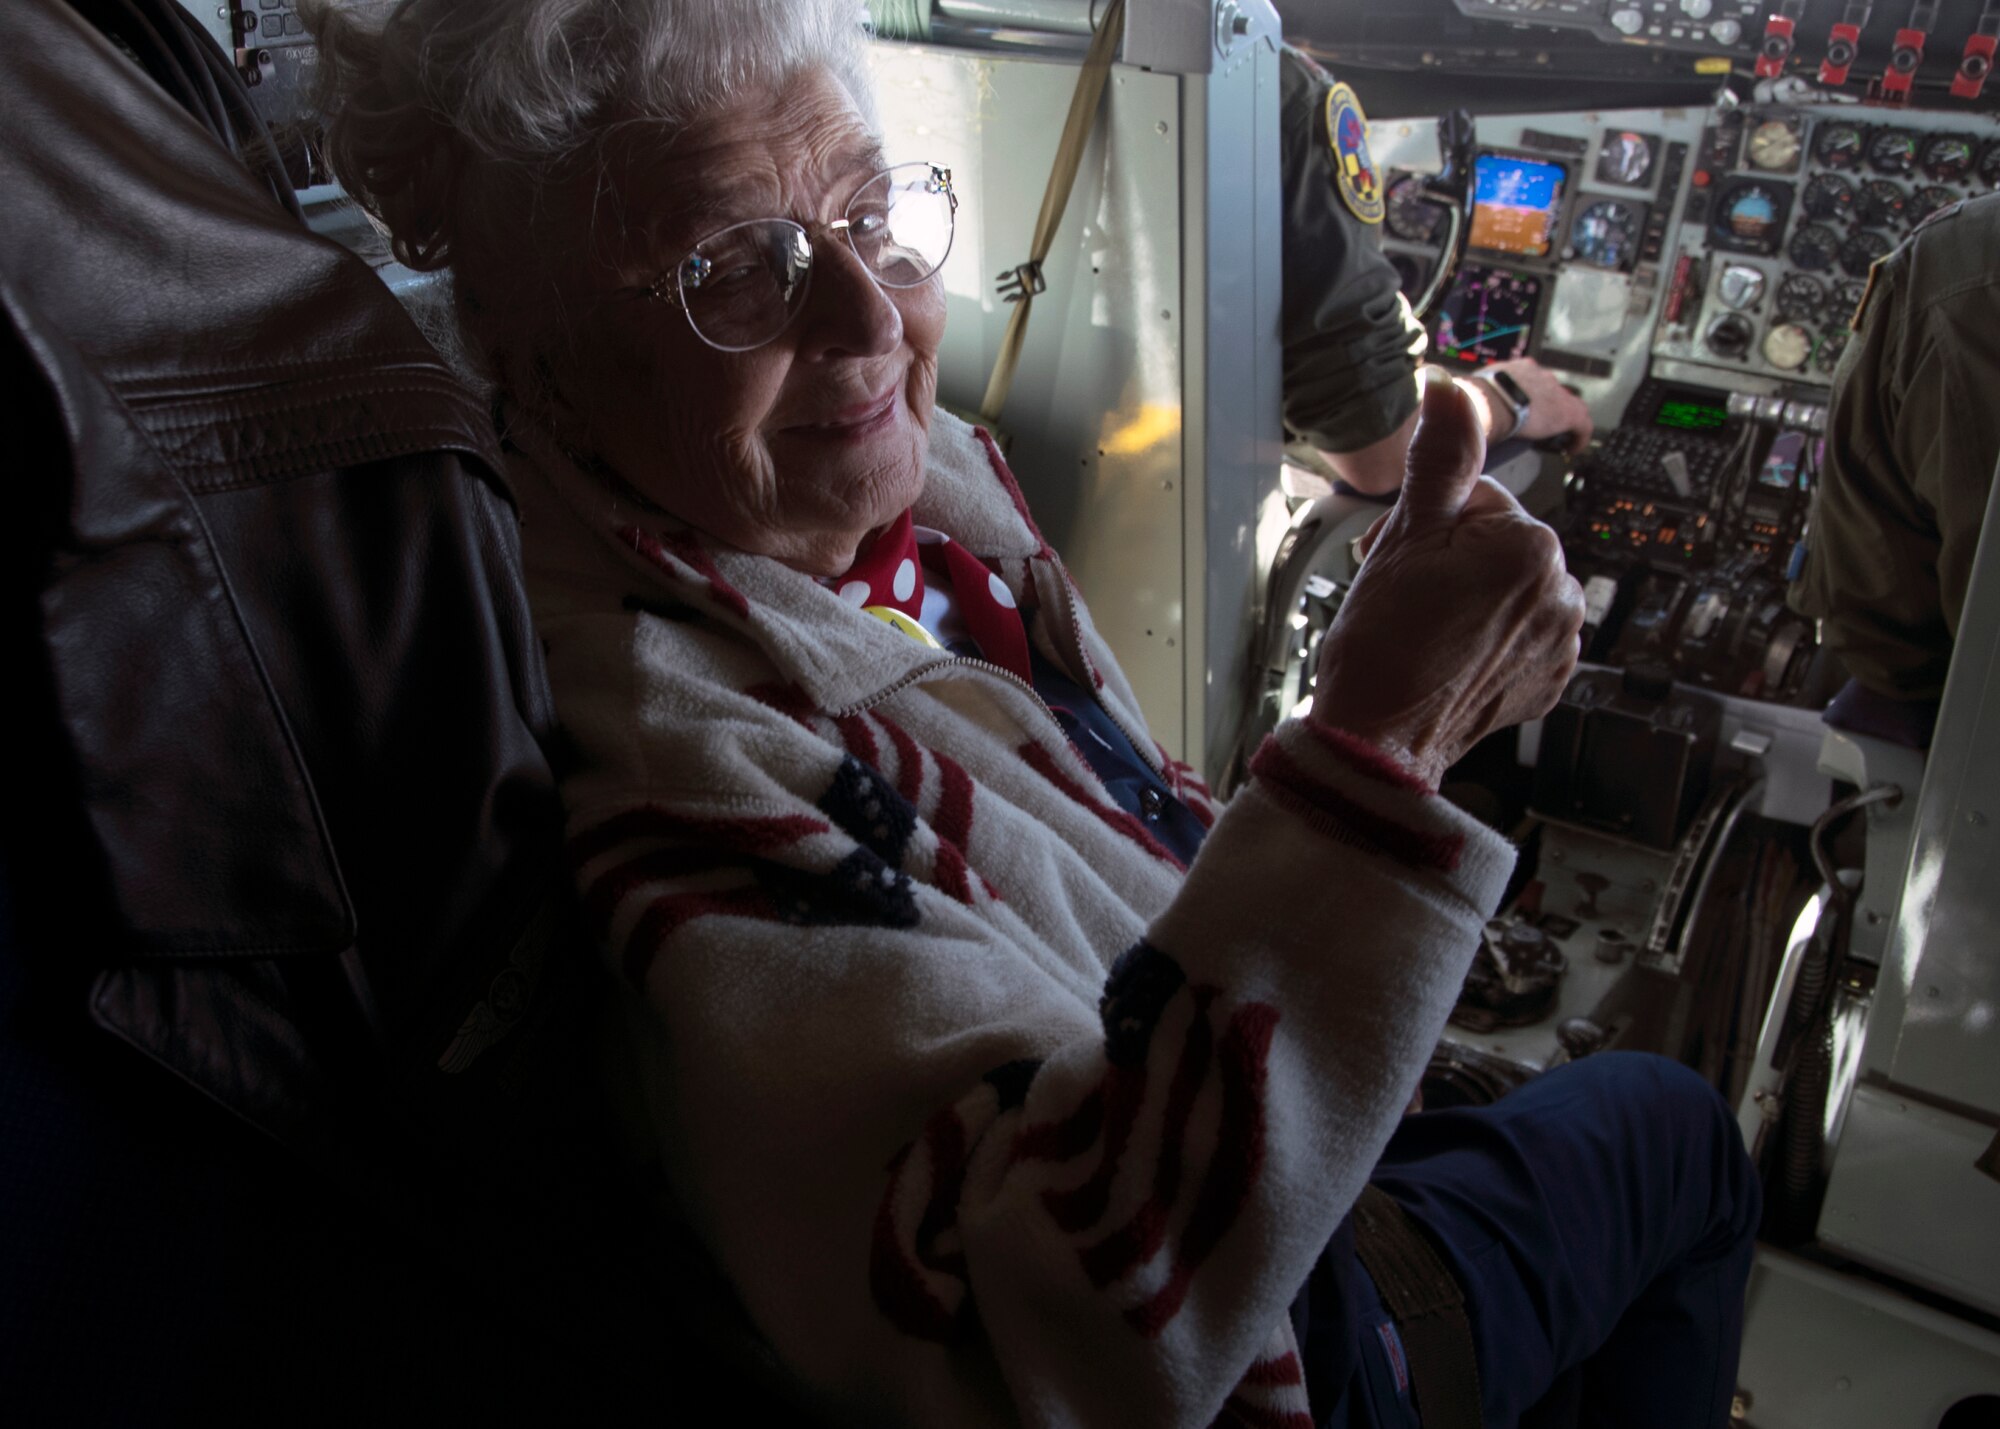 Mae Krier “Rosie the Riveter” poses for a photo during a flight on a KC-135 Stratotanker Oct. 22, 2019, at Joint Base Andrews, Md. Mae previously visited the wing where she met with Airmen, and returned for a flight on a KC-135 Stratotanker. Mae is also one of the original Rosie the Riveters from World War II. (U.S. Air Force photo/Staff Sgt. Cierra Presentado)